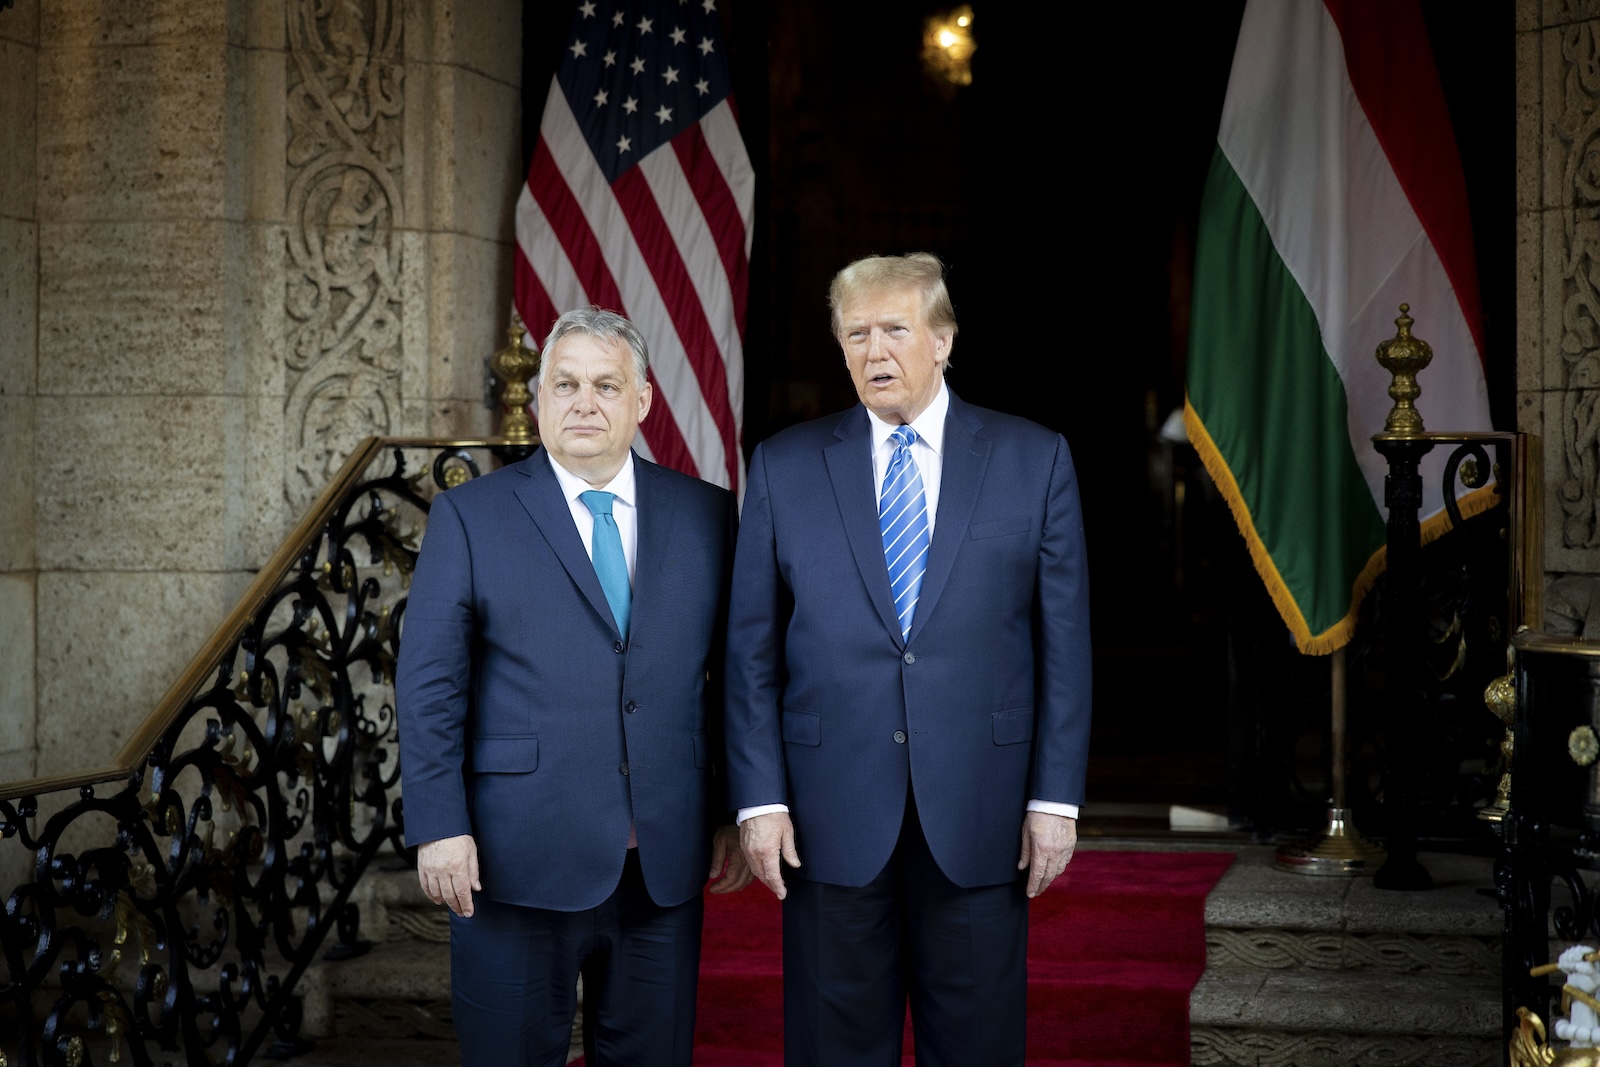 epa11208137 A handout photo made available by the Hungarian Prime Minister's Office shows  
former US President and Republican presidential candidate Donald Trump (R) and Hungarian Prime Minister Viktor Orban posing for photographers before their meeting at Trump's Mar-a-Lago estate in Palm Beach, Florida, USA, 08 March 2024.  EPA/Zoltan Fischer / HANDOUT HANDOUT EDITORIAL USE ONLY NO SALES HANDOUT EDITORIAL USE ONLY/NO SALES HANDOUT EDITORIAL USE ONLY/NO SALES